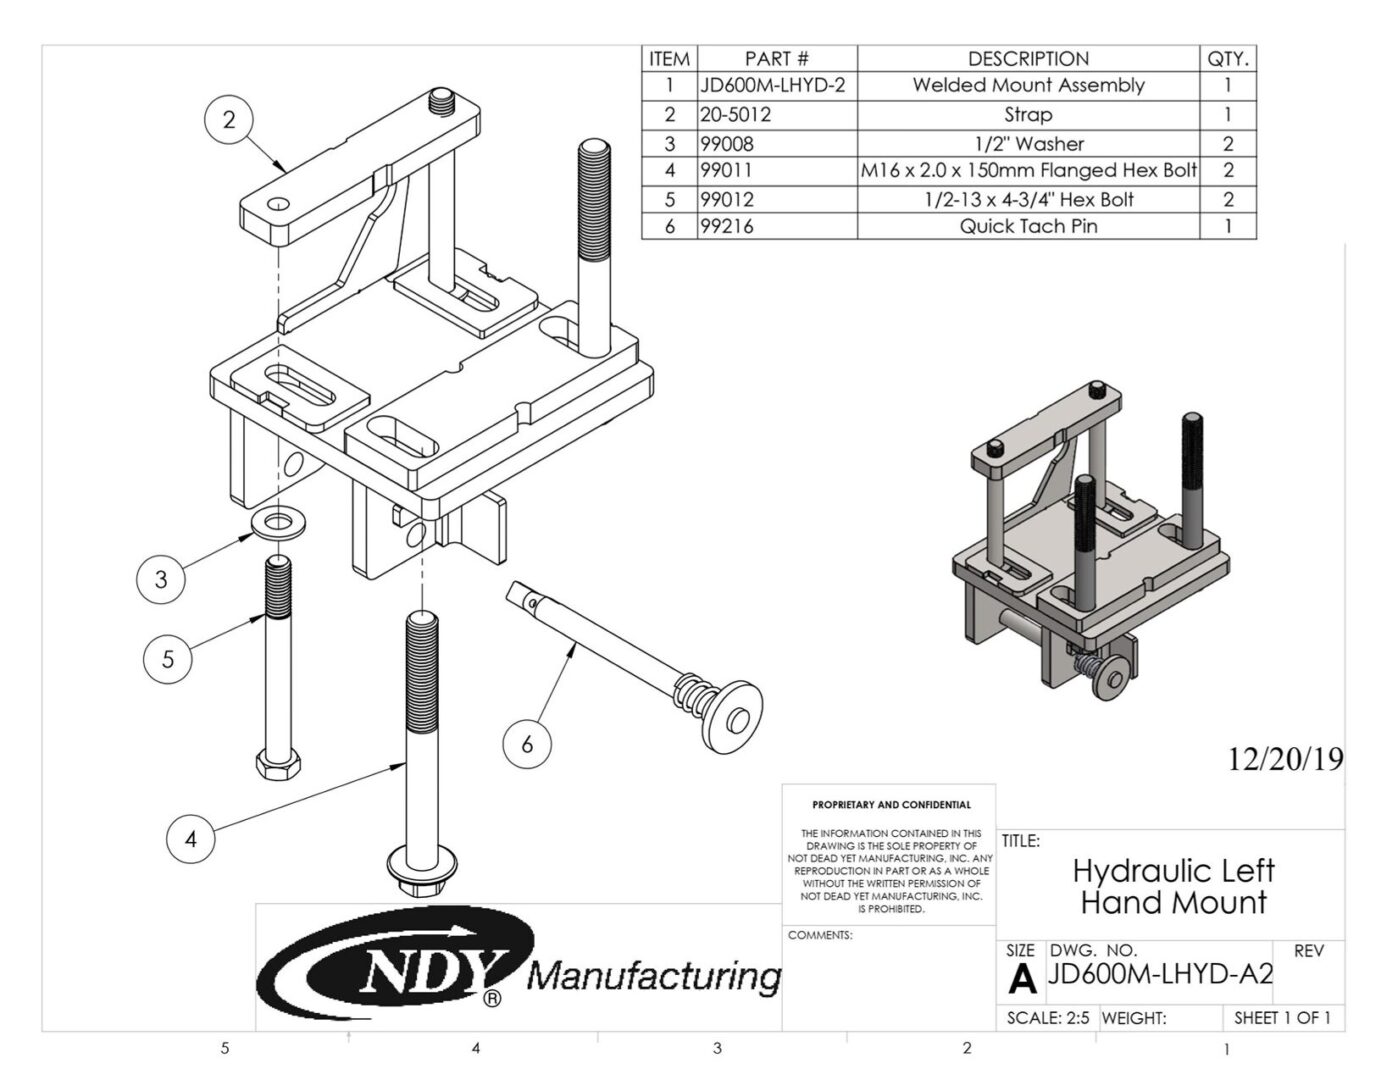 A diagram showing the parts of a Stalk Stomper Mount Assembly for Left Hydraulic Row on John Deere 600/700 Series Corn Heads.